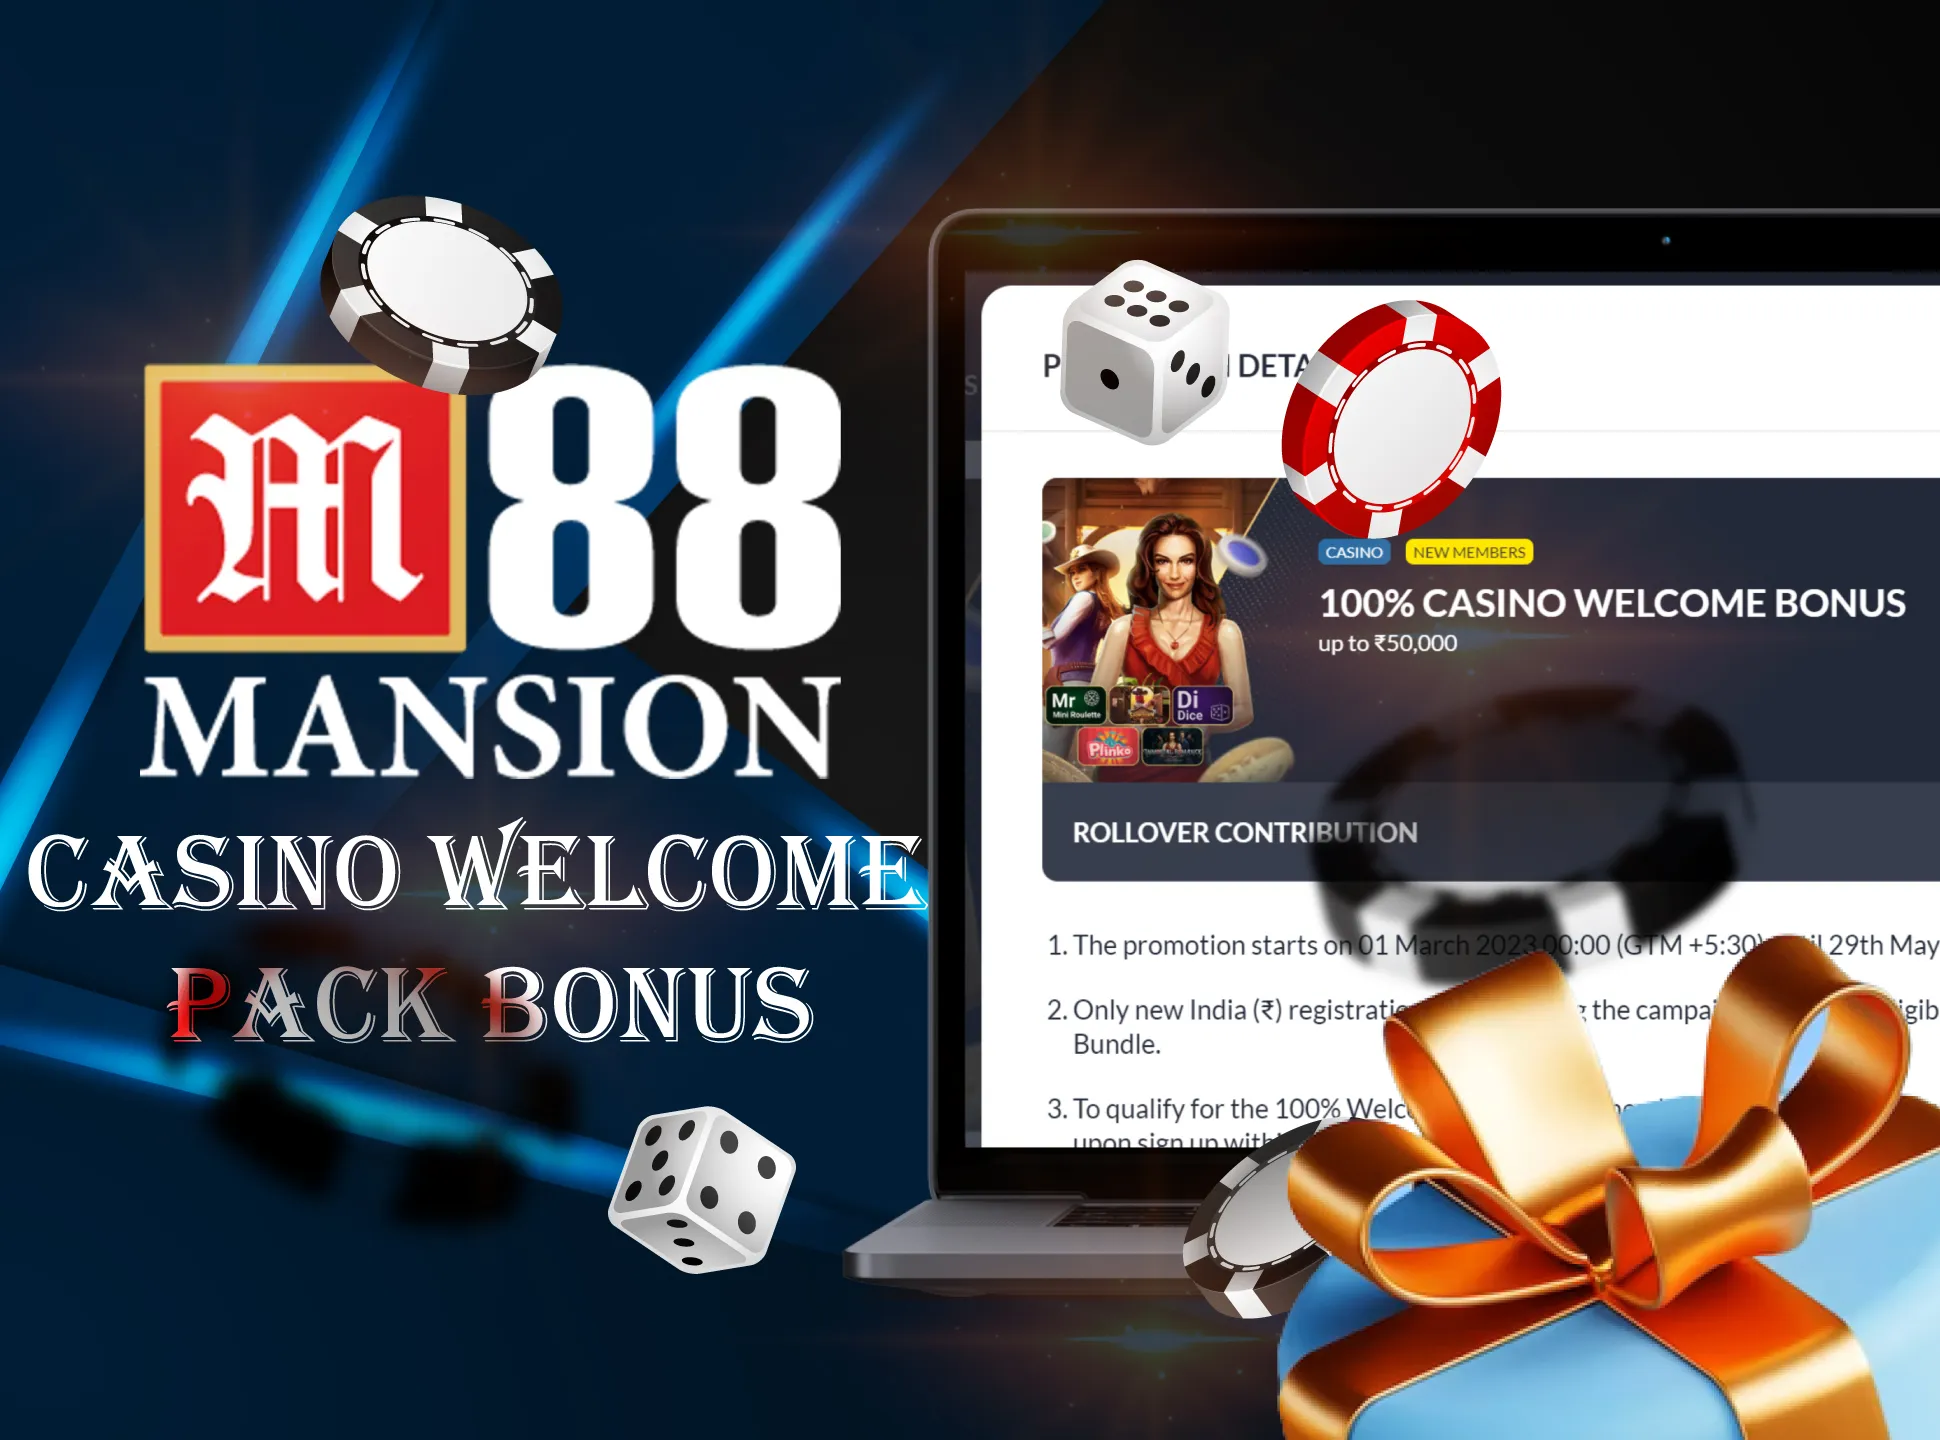 Get your casino welcome pack at M88 after playing casino games.